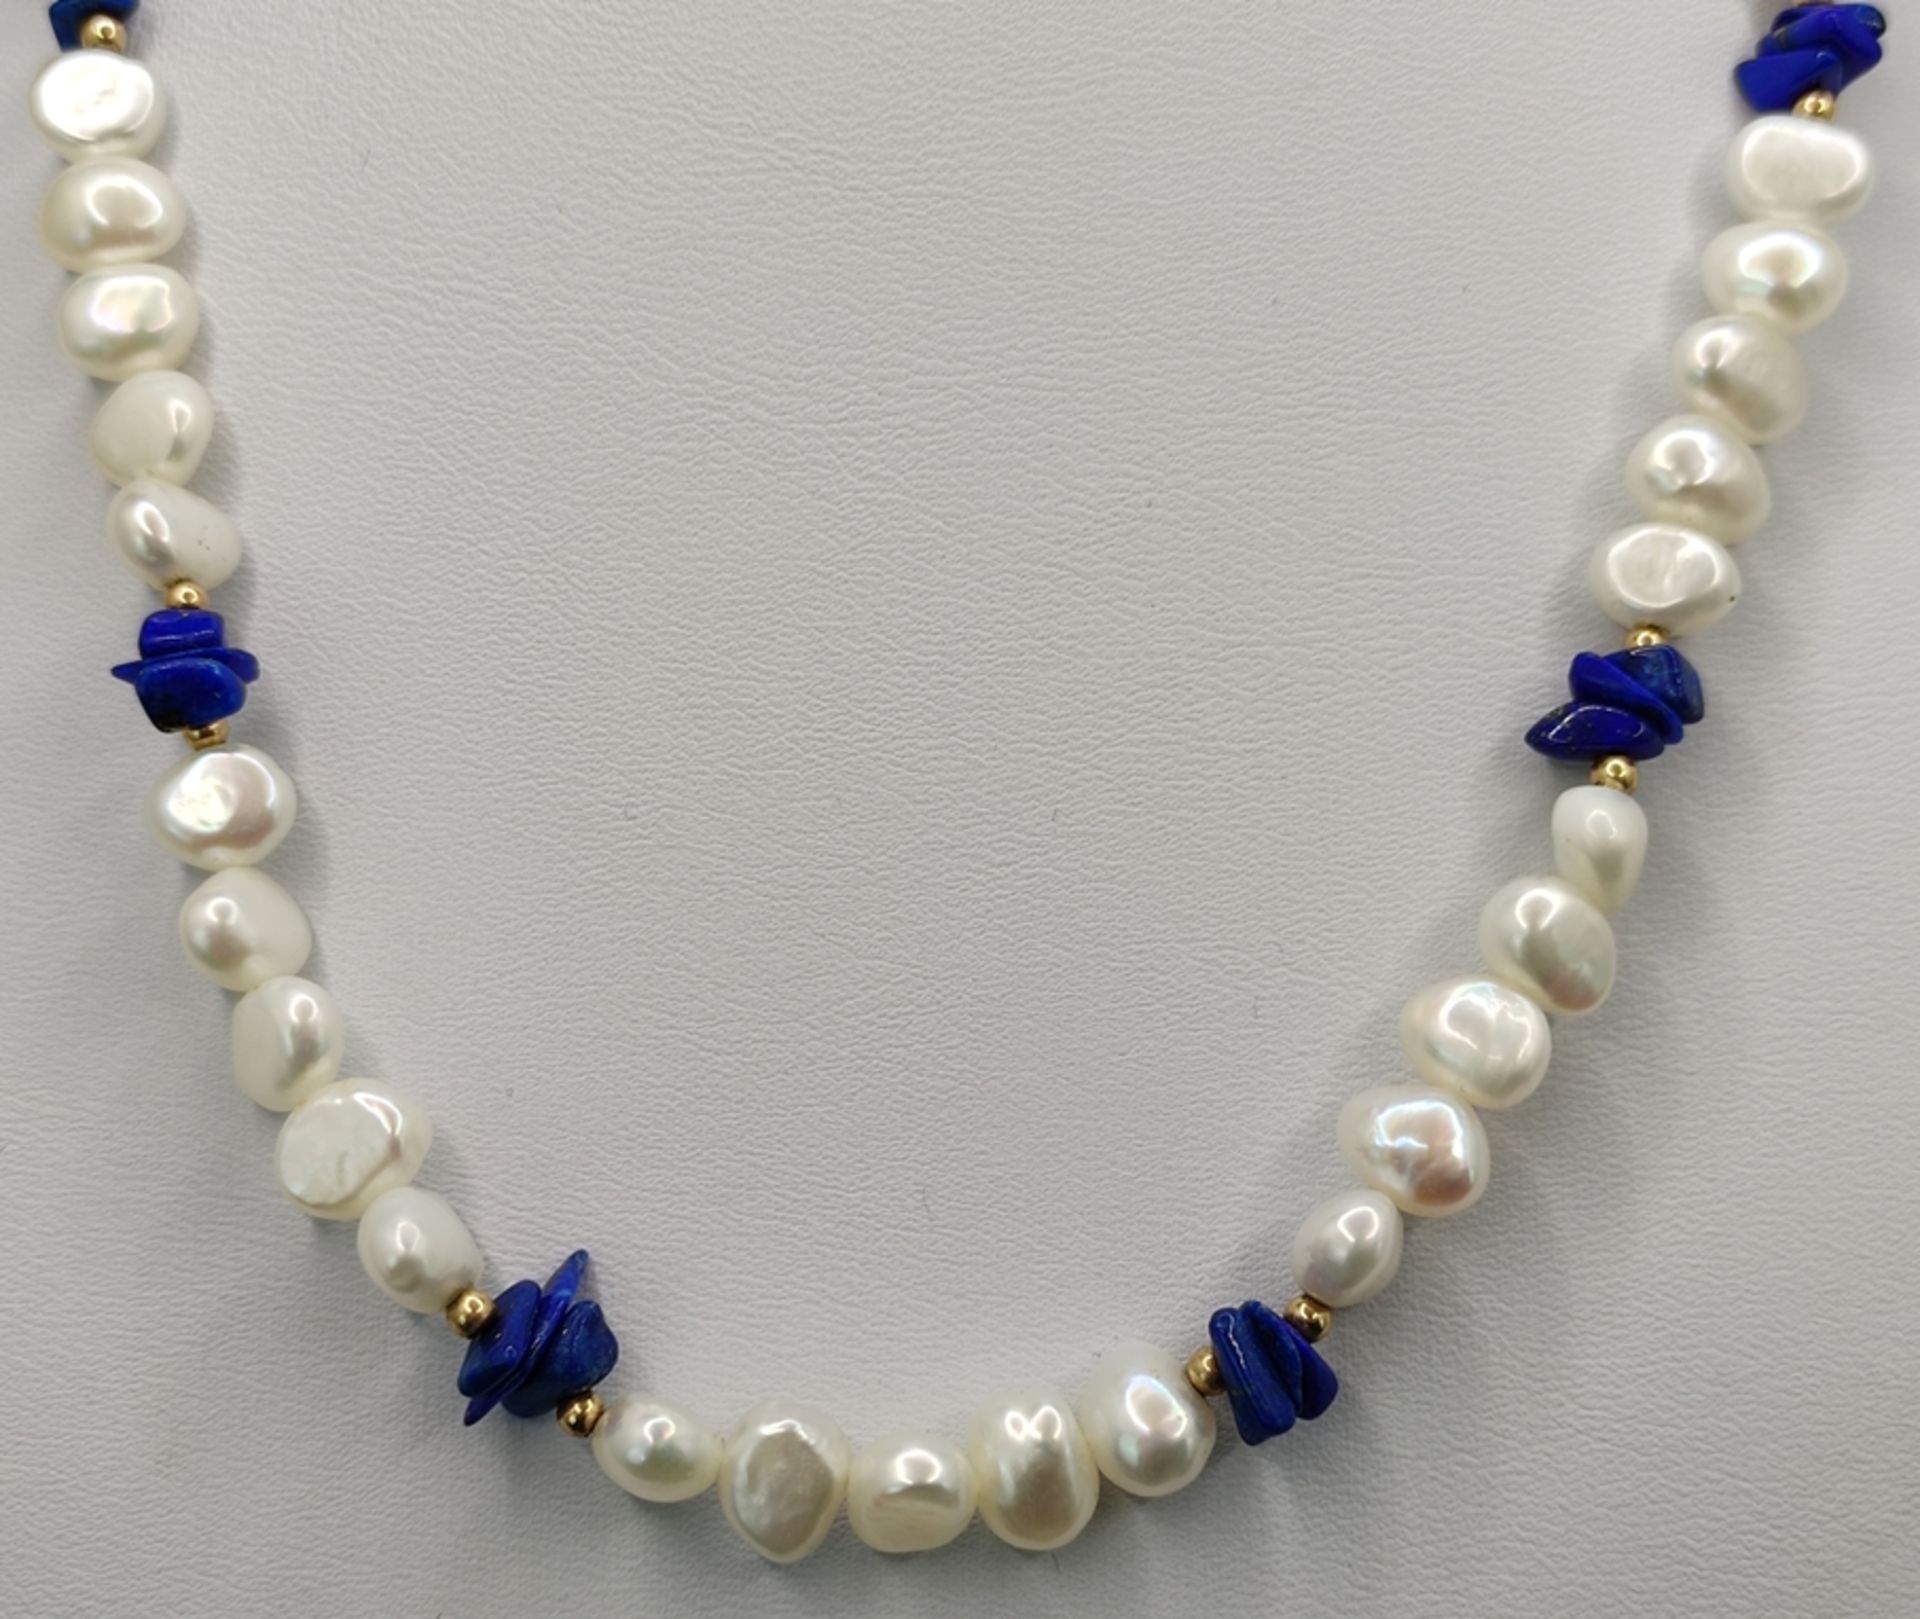 Pearl lapis lazuli necklace, lobster clasp 375/9K yellow gold, length 44cm